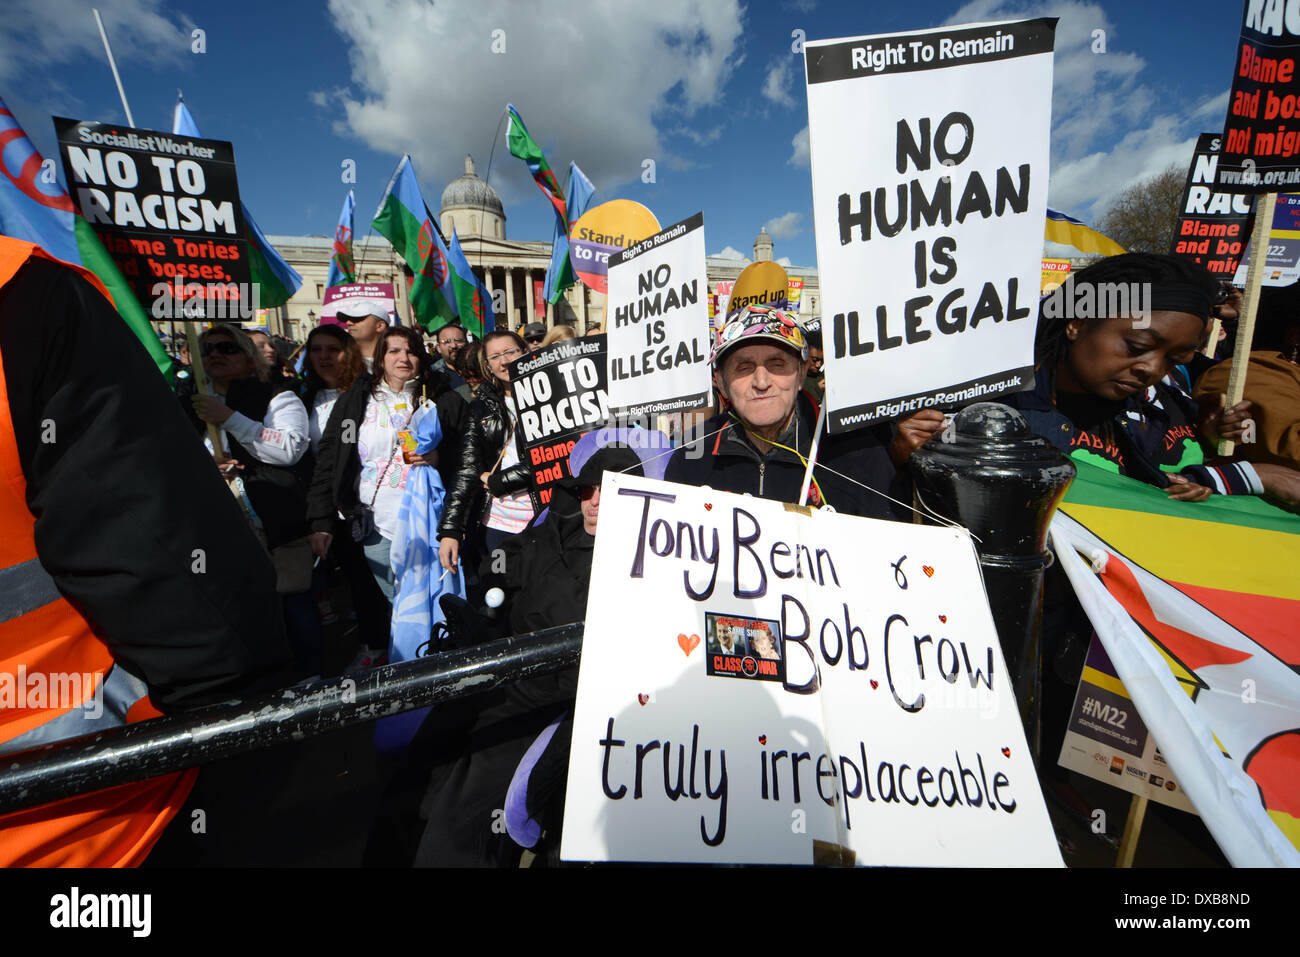 London UK. 22nd March 2014. Thousands of anti-racism and anti-fascism protesters and supporters marched from Westminster’s Parliament buildings to a rally in Trafalgar Square, London. The demonstration falls on United Nations Anti-Racism Day. Photo by See Li/Alamy Live News Stock Photo